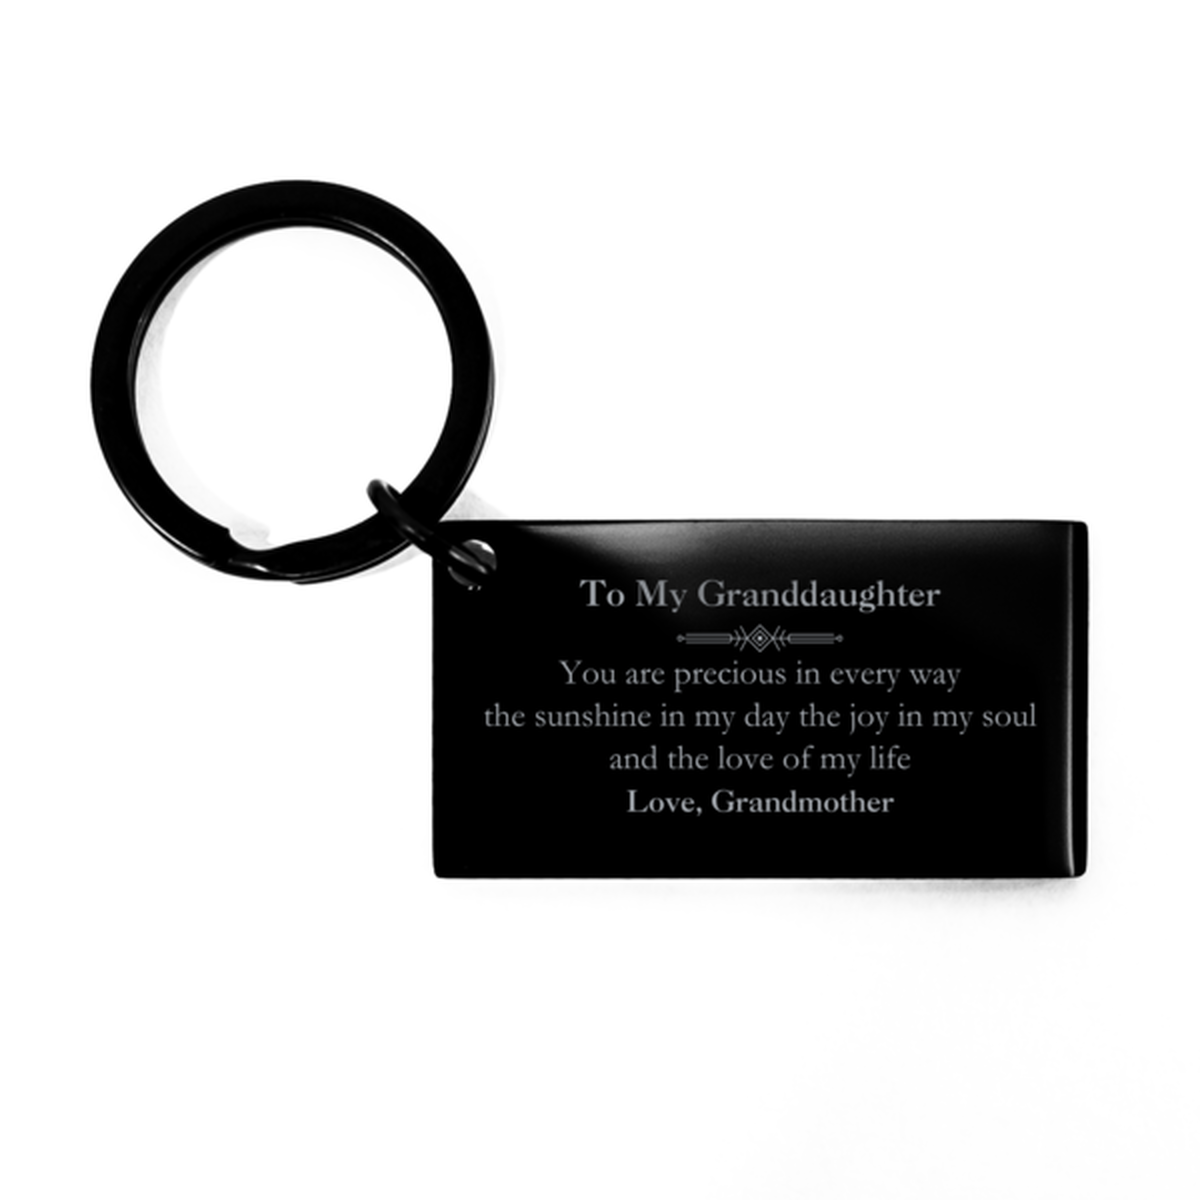 Graduation Gifts for Granddaughter Keychain Present from Grandmother, Christmas Granddaughter Birthday Gifts Granddaughter You are precious in every way the sunshine in my day. Love, Grandmother